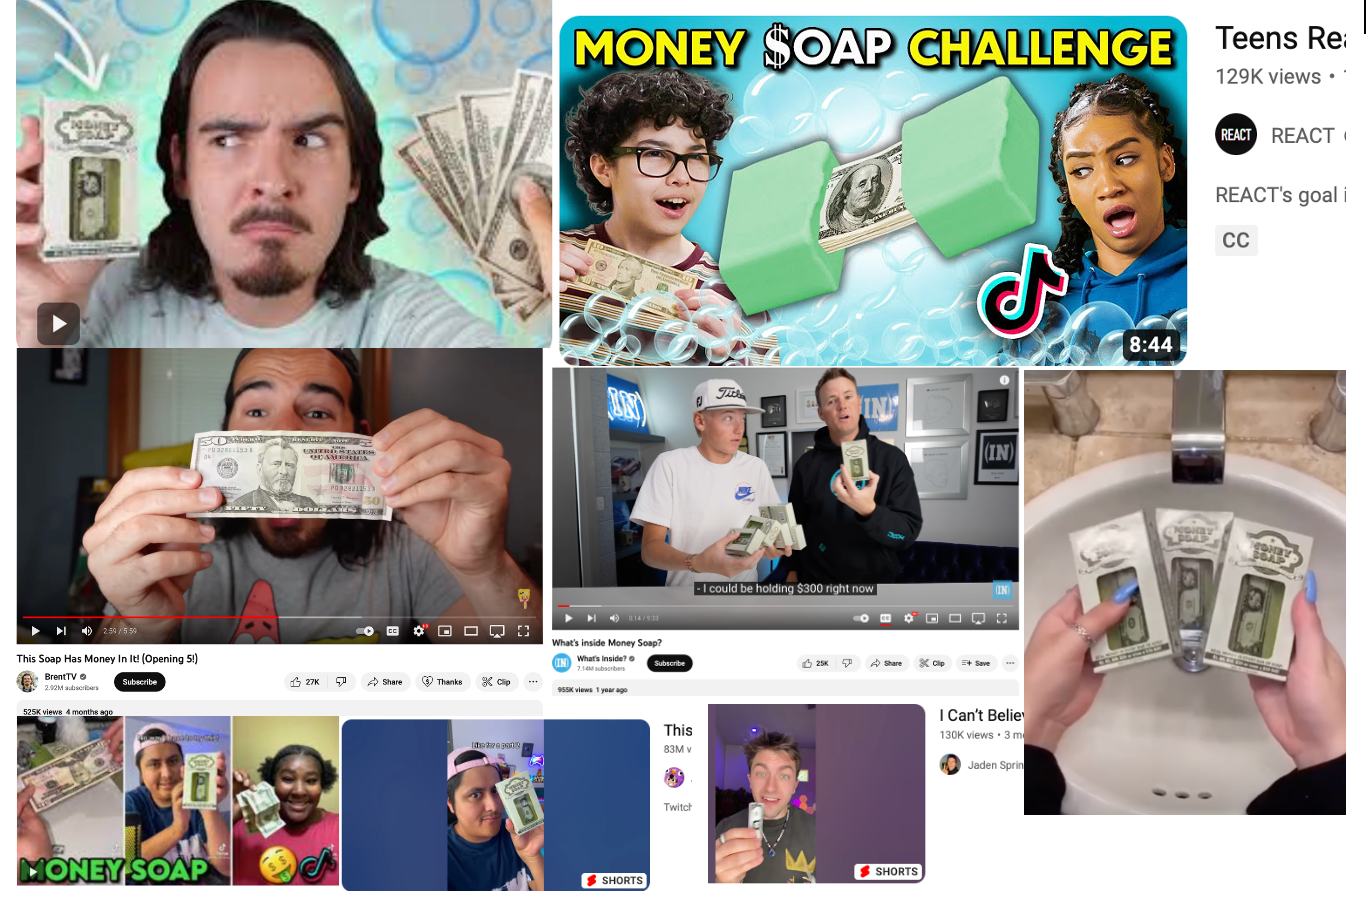 Load video: What will you find in your money soap?